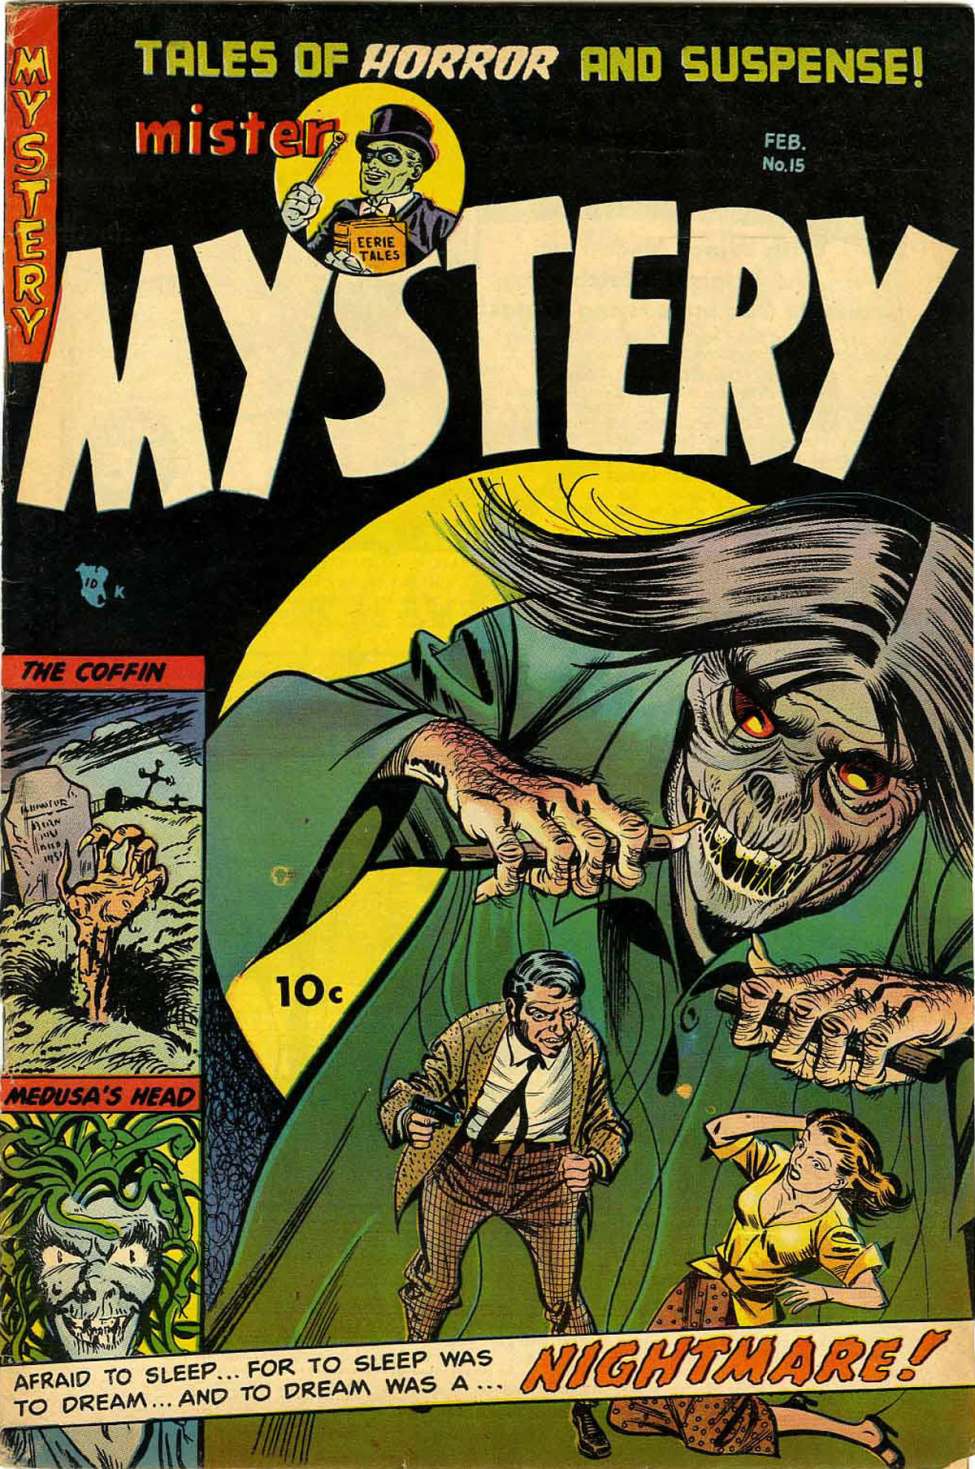 Book Cover For Mister Mystery 15 (alt) - Version 2